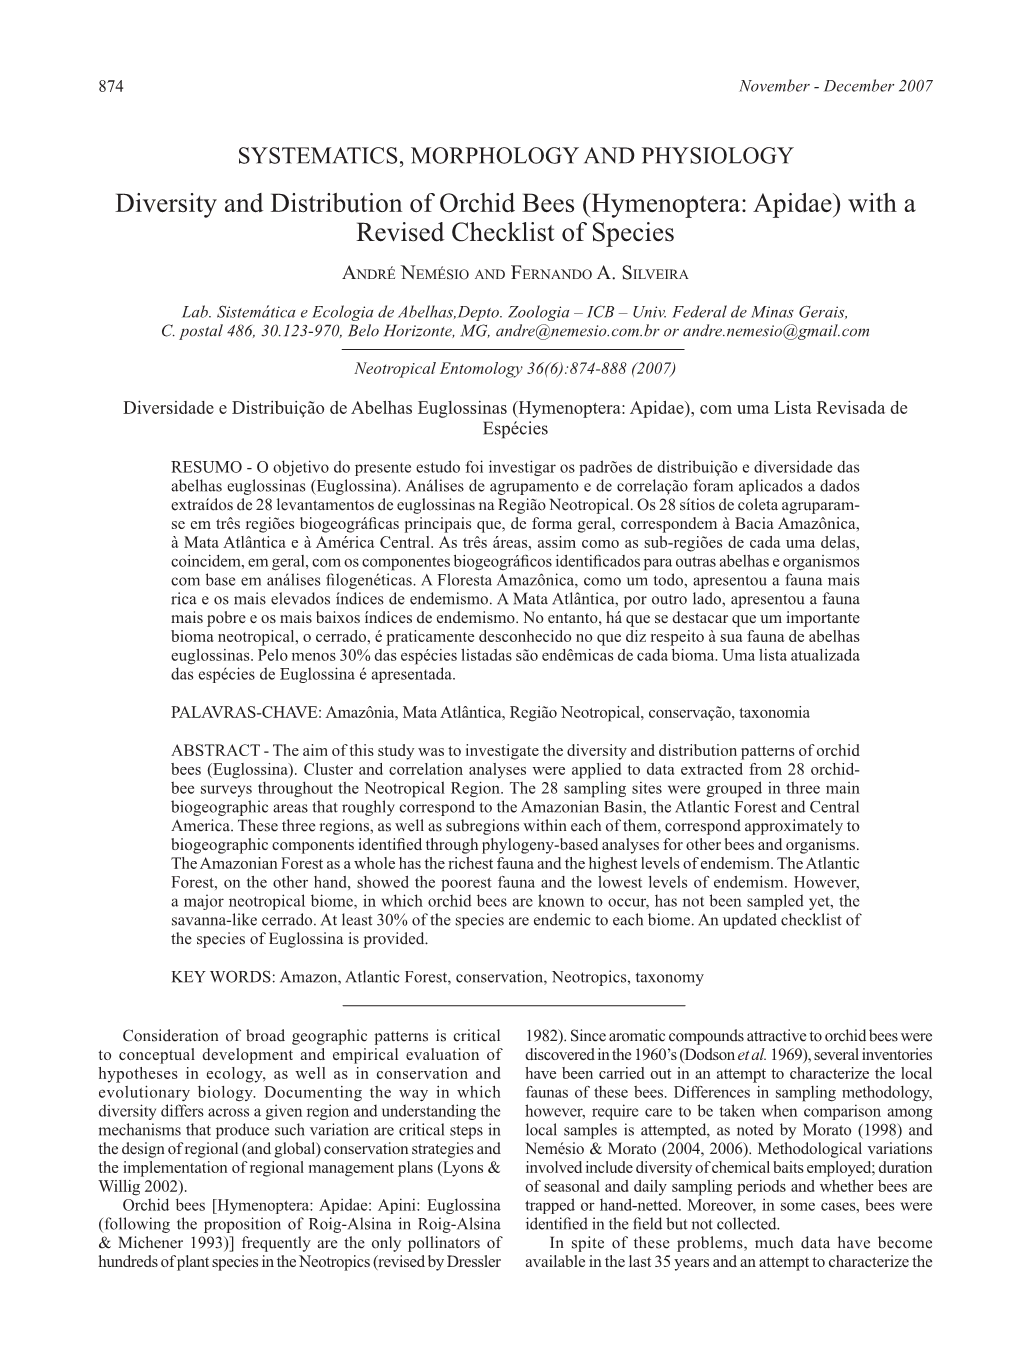 Diversity and Distribution of Orchid Bees (Hymenoptera: Apidae) with a Revised Checklist of Species